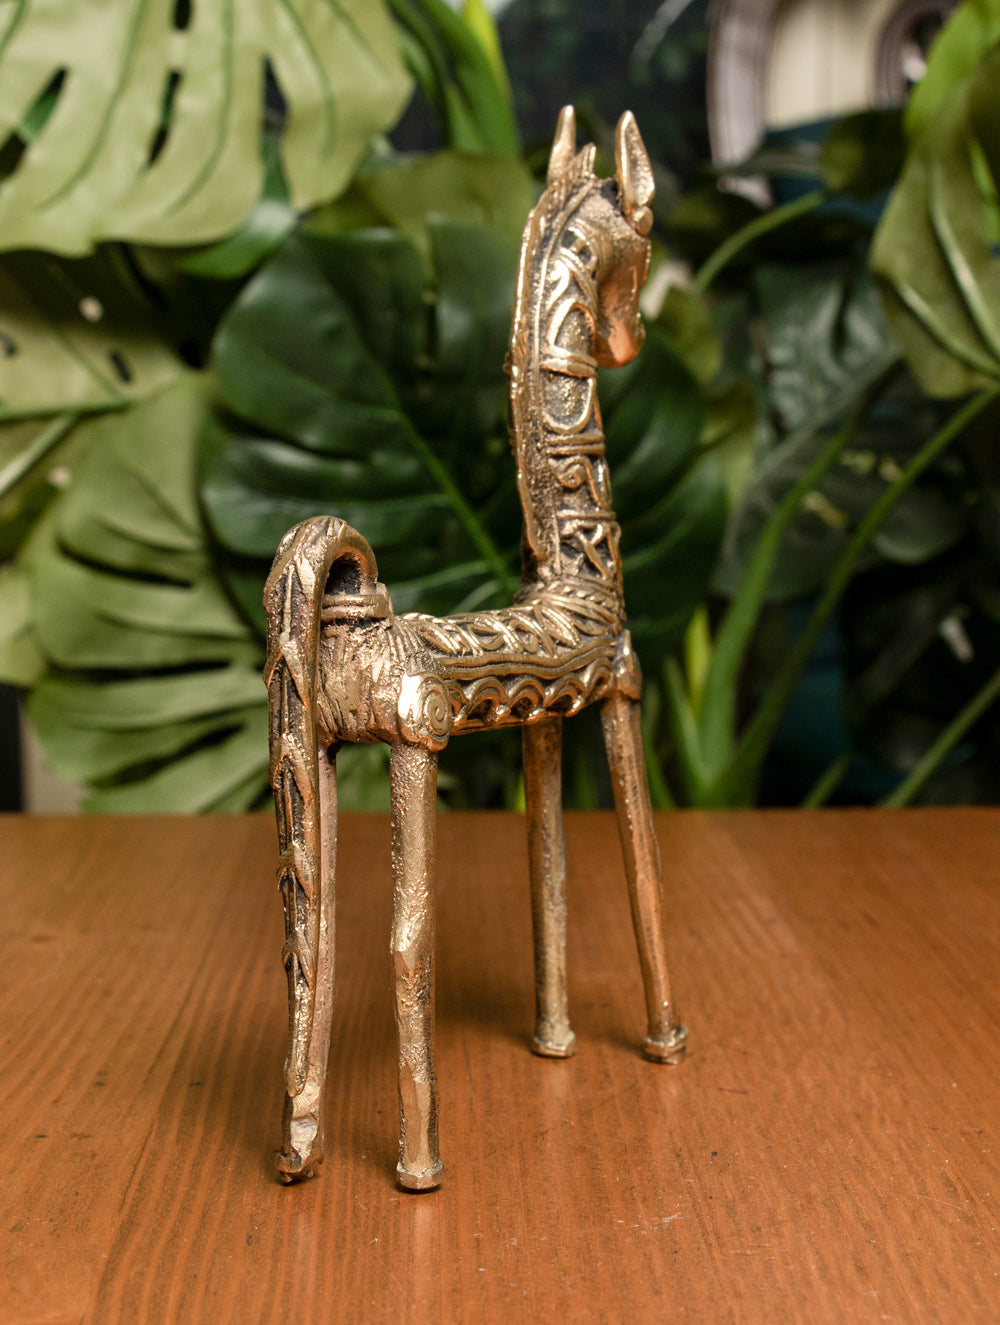 Load image into Gallery viewer, Dhokra Craft Curio (Large) - Horse - The India Craft House 